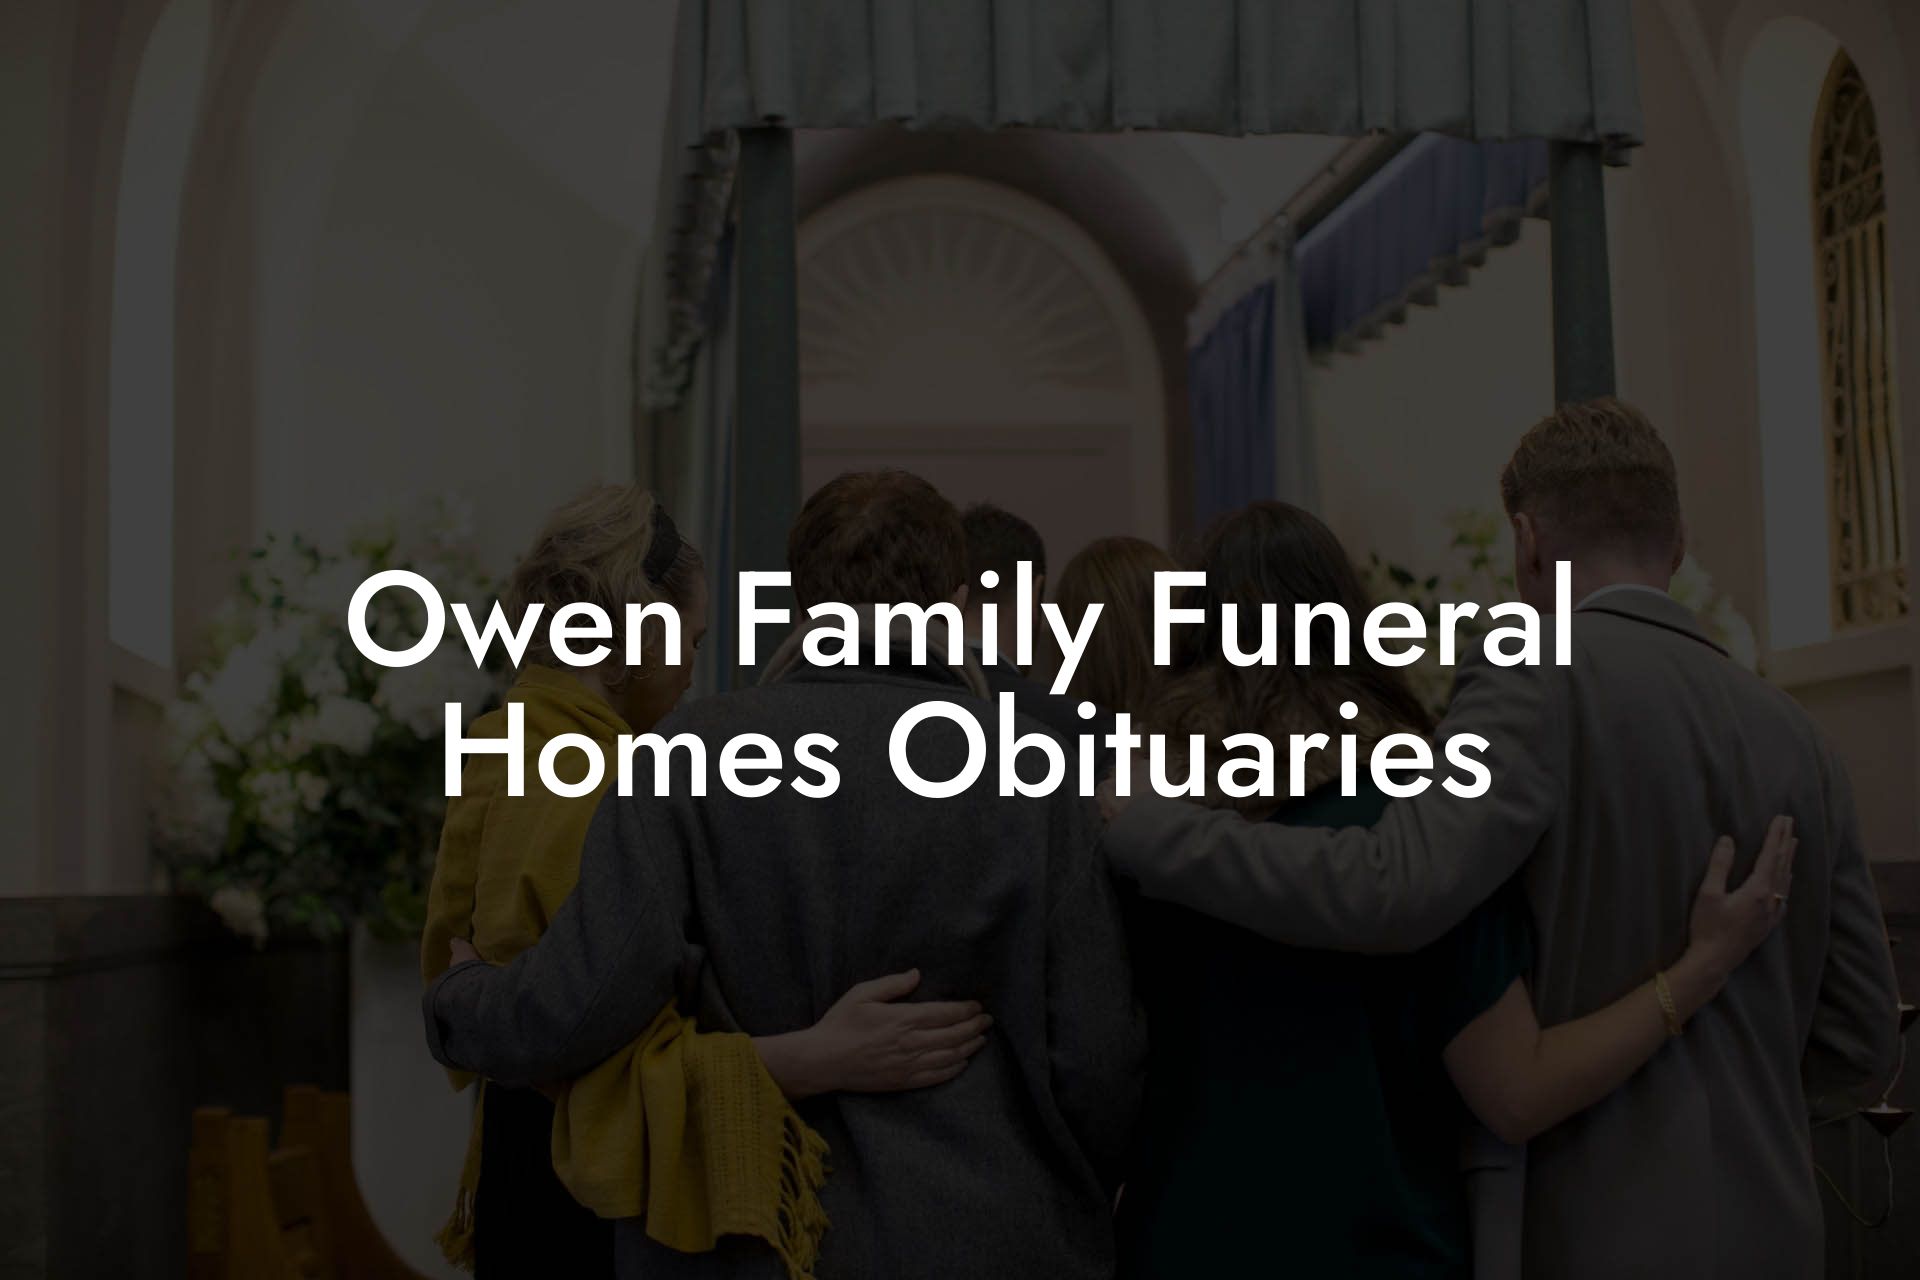 Owen Family Funeral Homes Obituaries